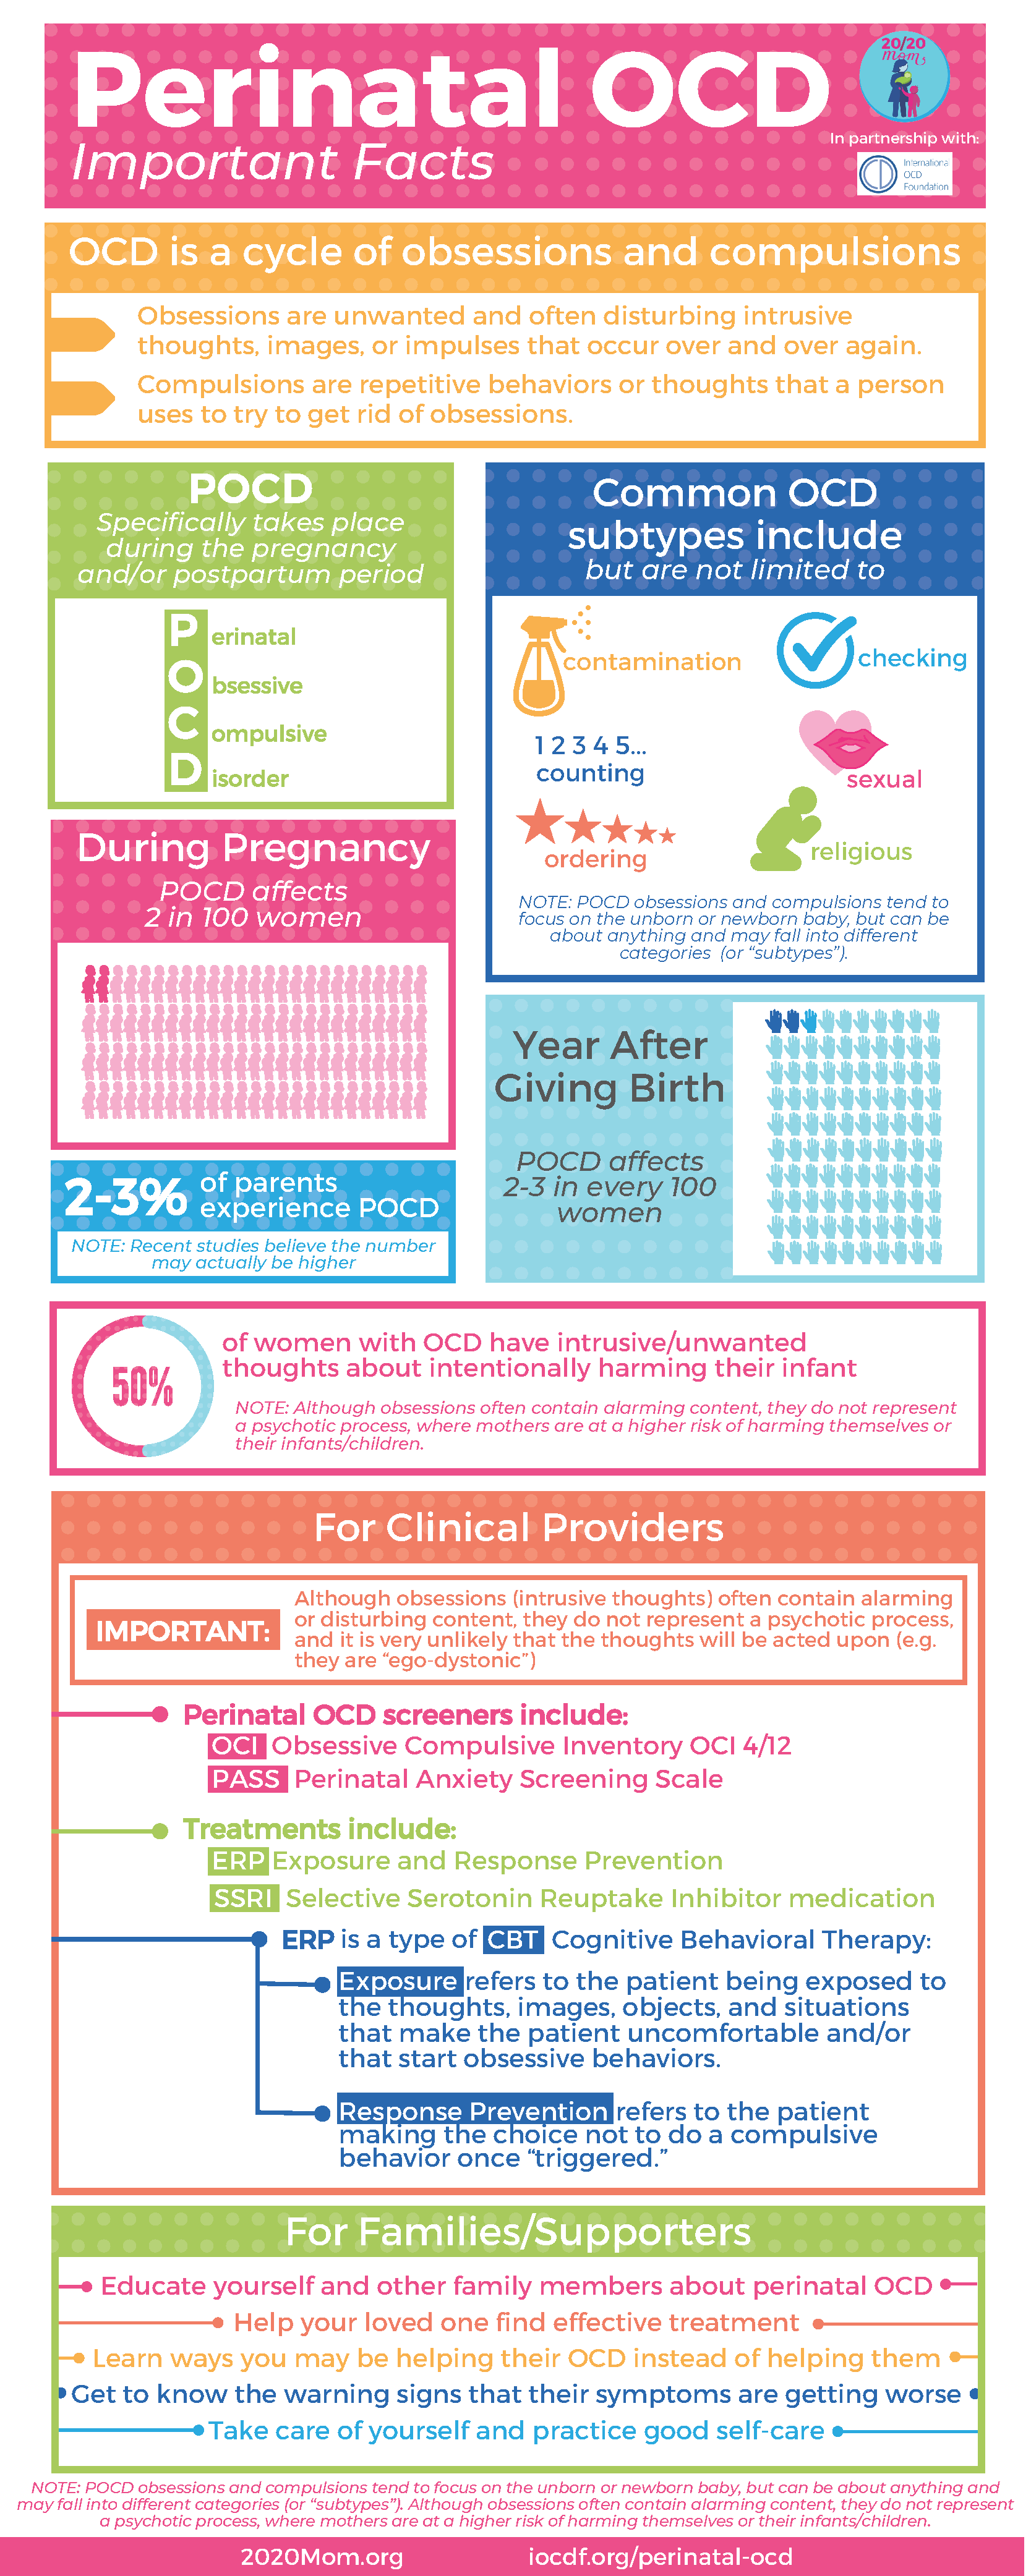 Perinatal OCD Important Facts Infographic to help users.